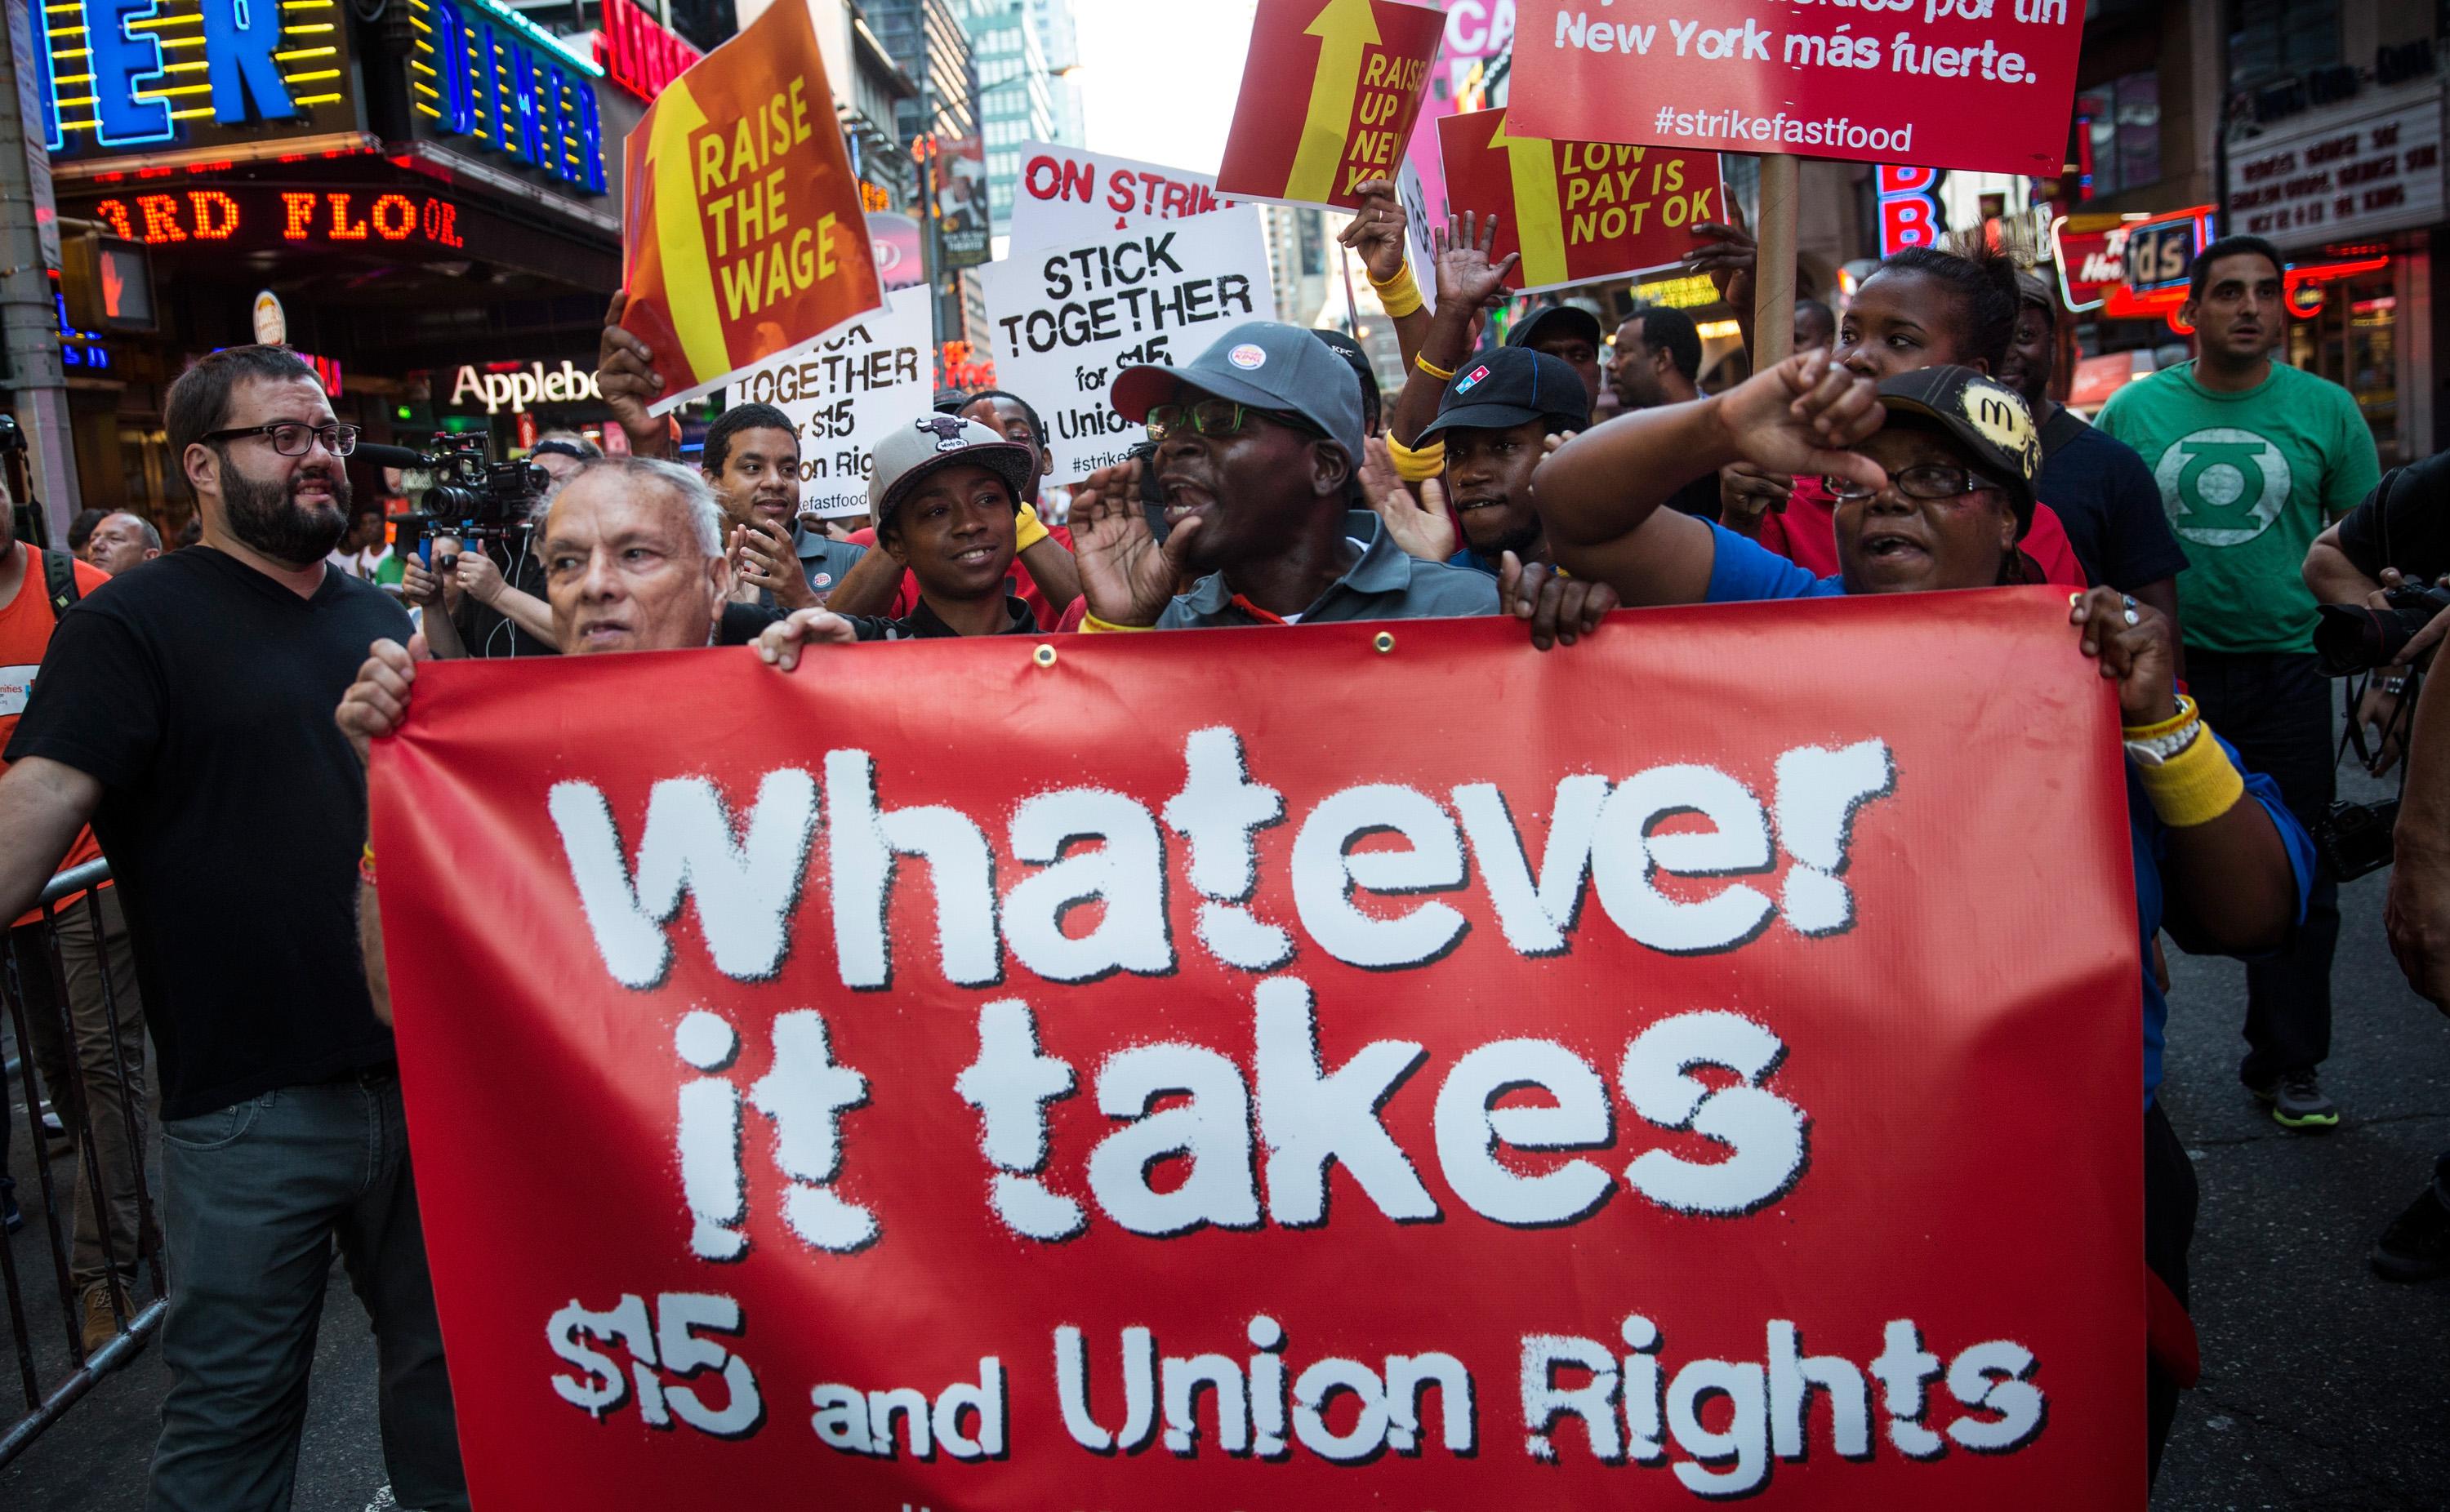 Fast Food Workers Organize National Day To Strike For Higher Wages